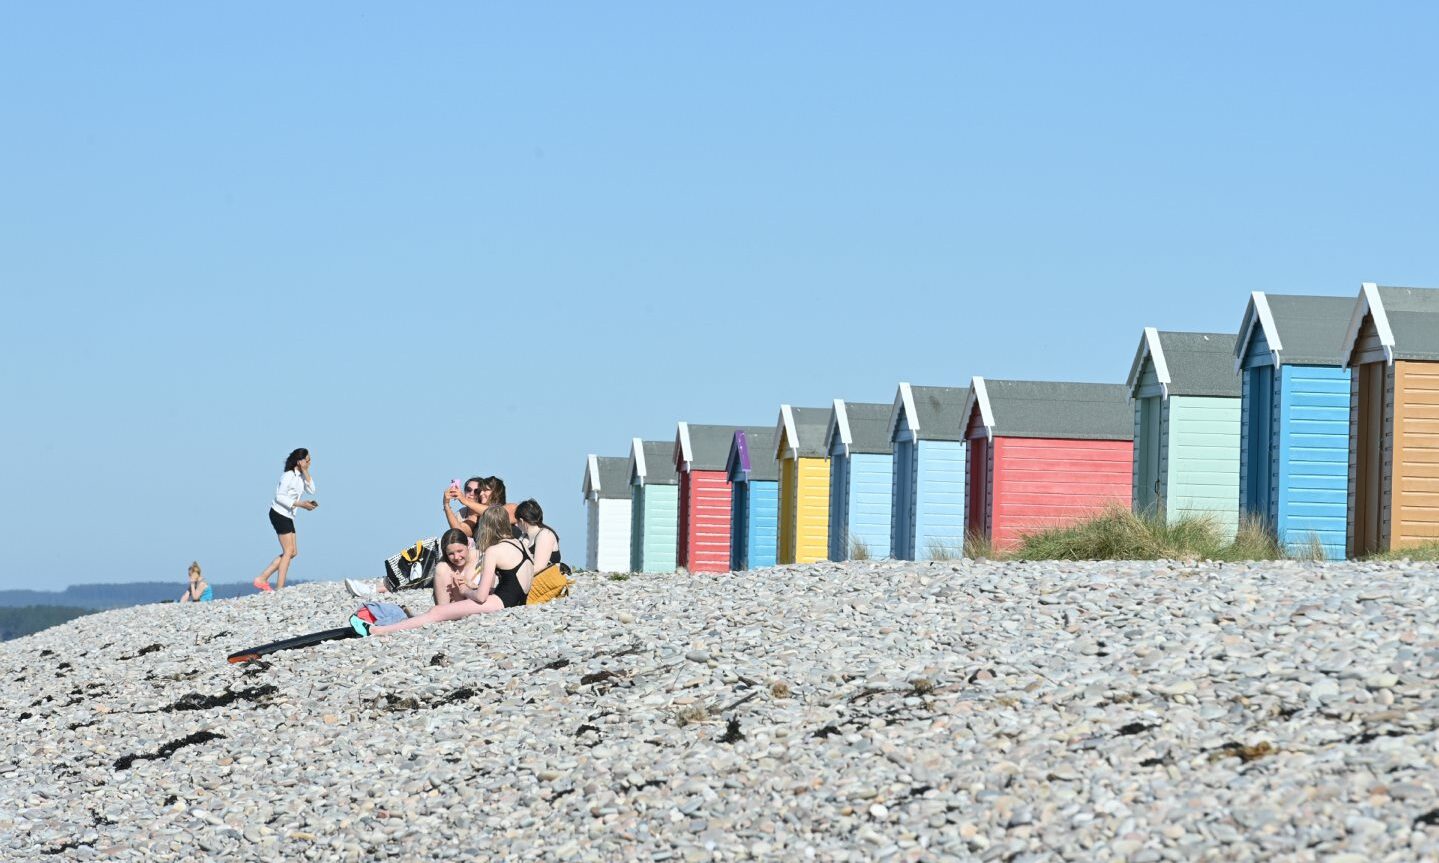 A small group of people sit on the beach in front of some colourful beach huts with not a cloud in the sky. 